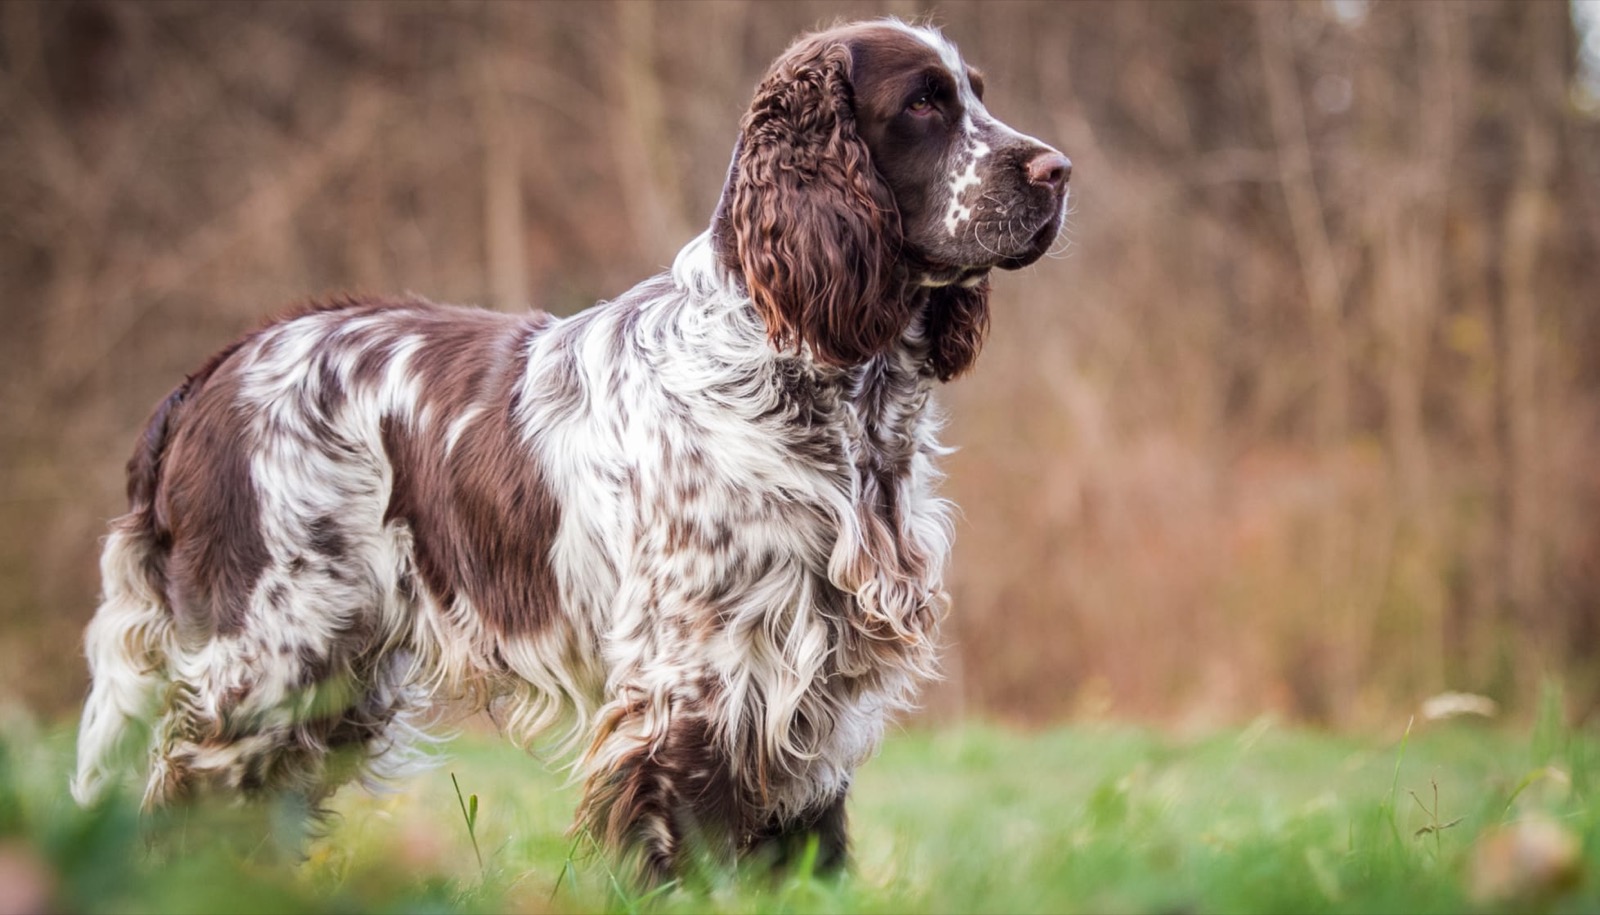 Can You Pass This Geography Quiz Where Every Question Comes With a 🐶 Dog-Related Clue? English Springer Spaniel